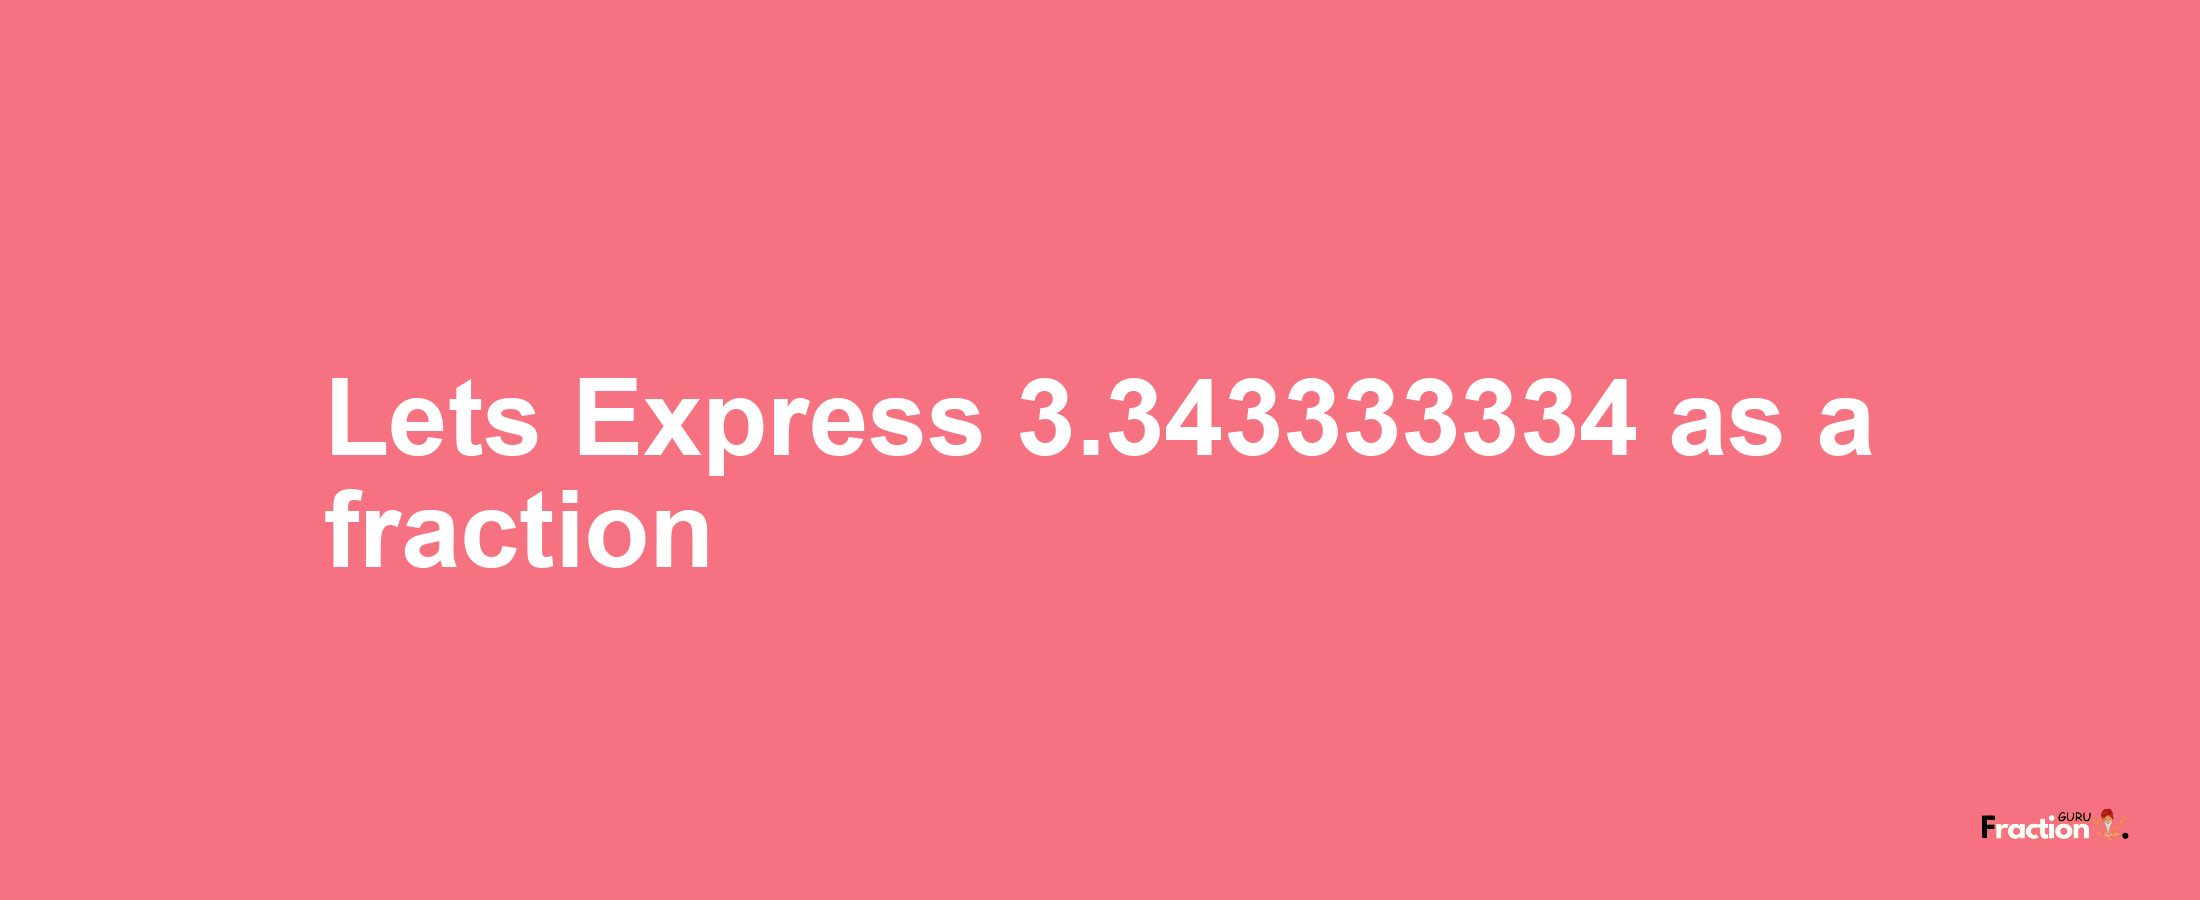 Lets Express 3.343333334 as afraction